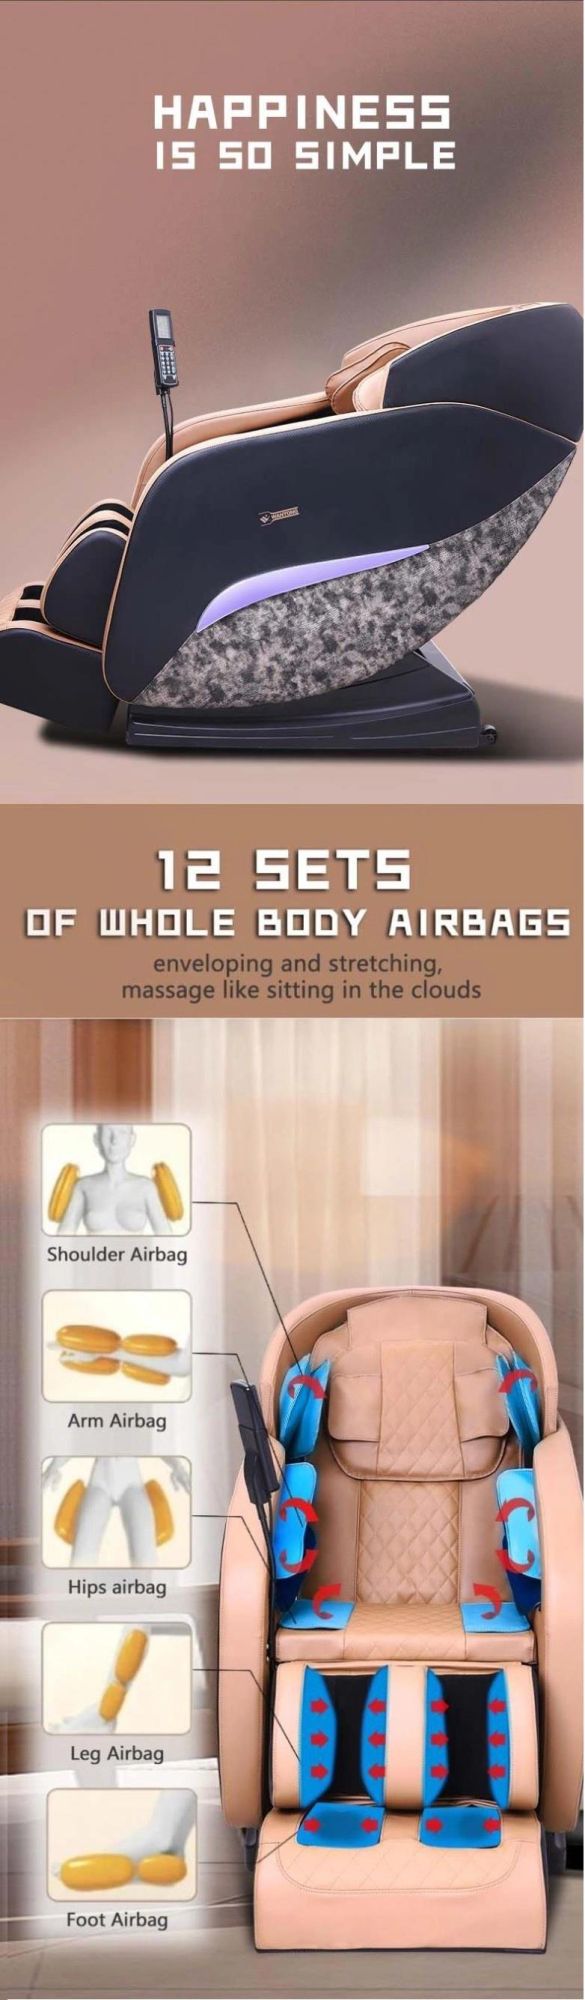 3D Zero Gravity OEM Commercial Mall Chair Vending Coin Bill Operated Massage Chair OEM Service